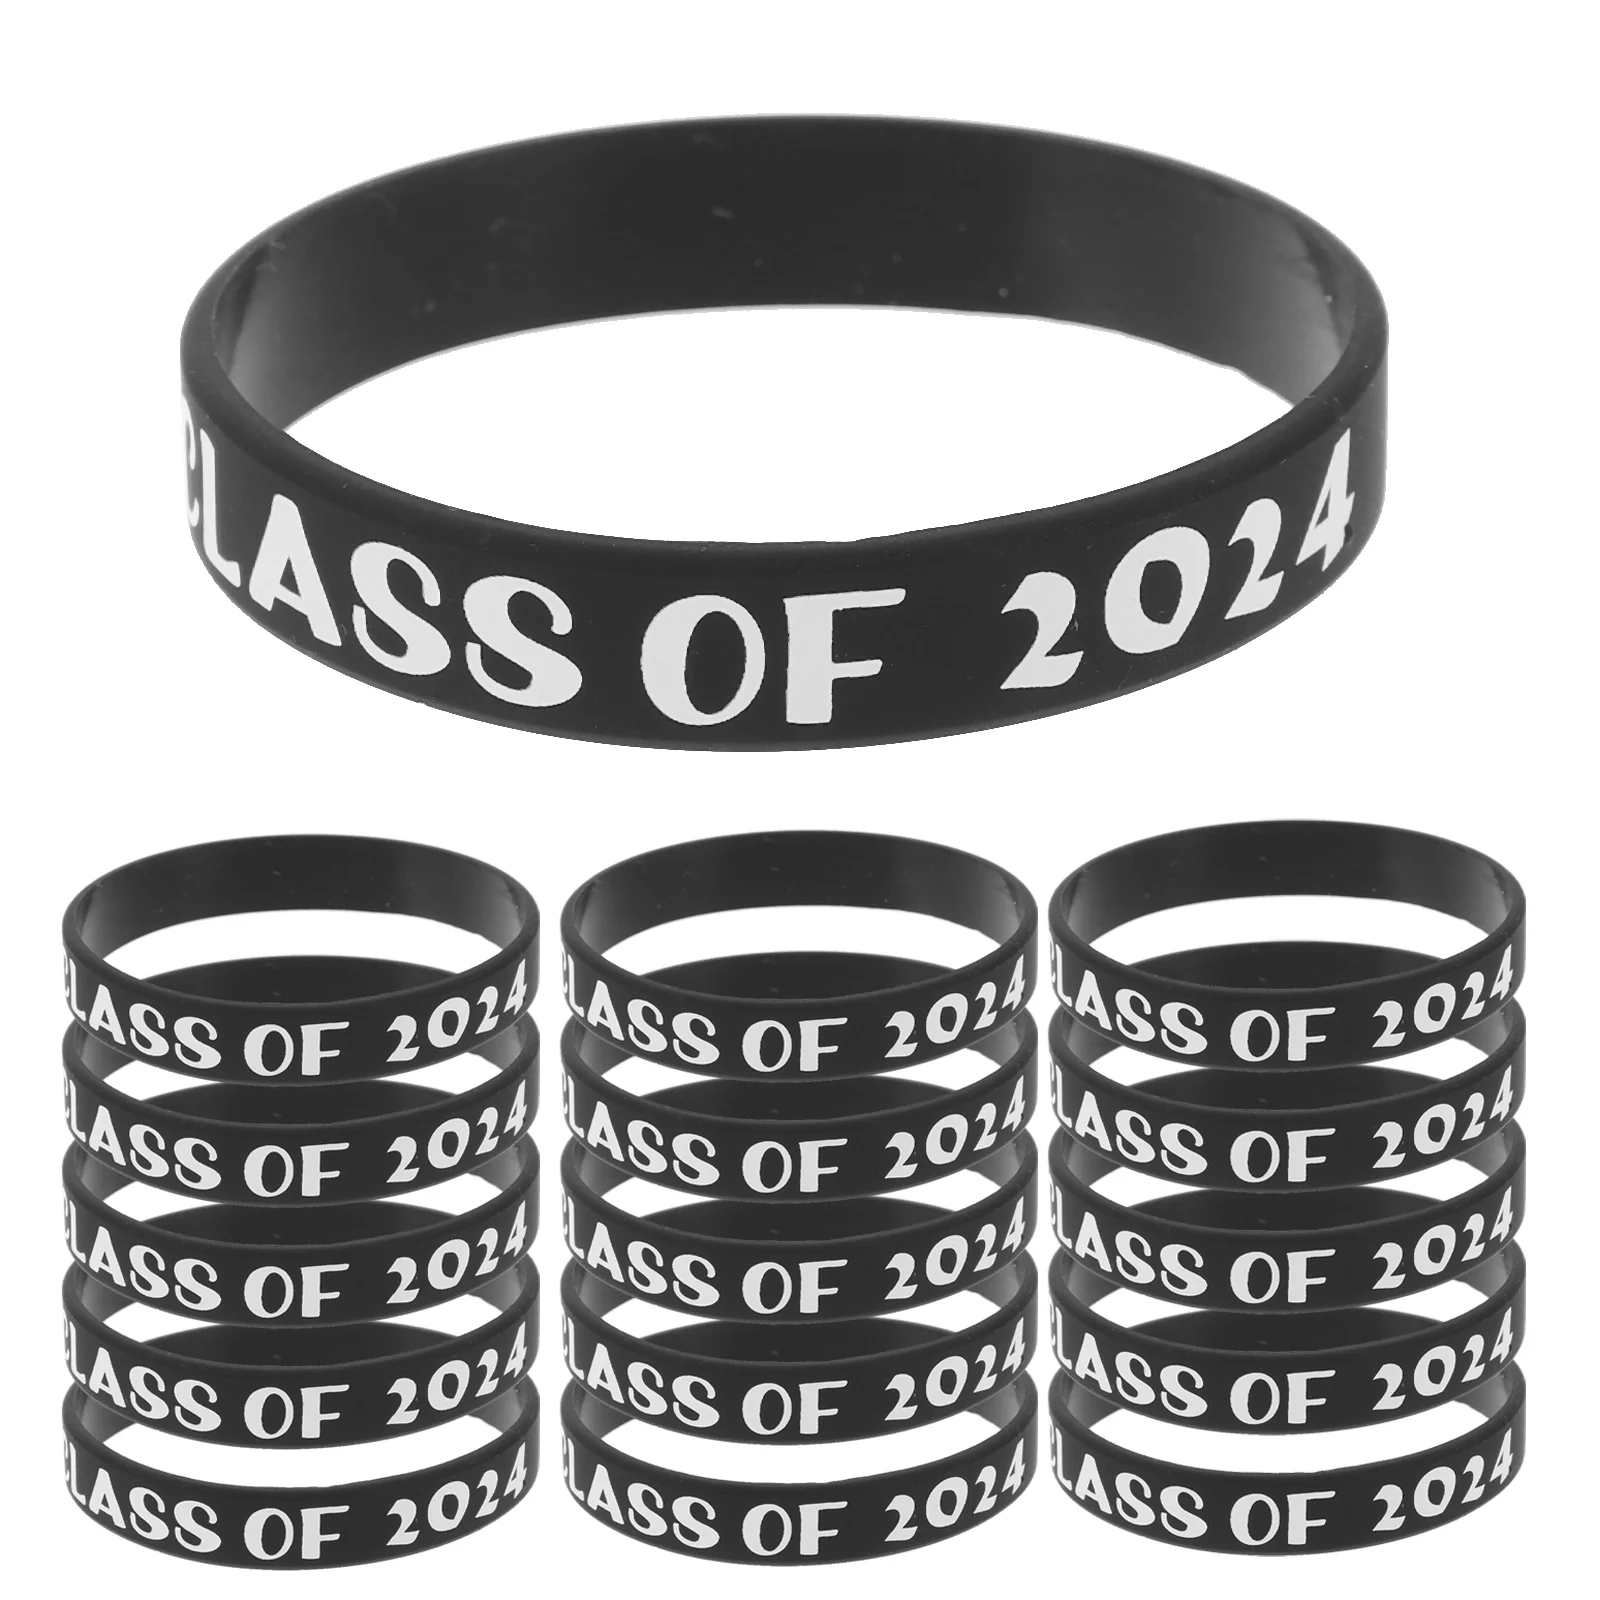 50 Pcs Graduation Wristband College Gift Silicone Class of 2024 Bracelet Rn Gifts Chic Silica Gel Portable Reusable